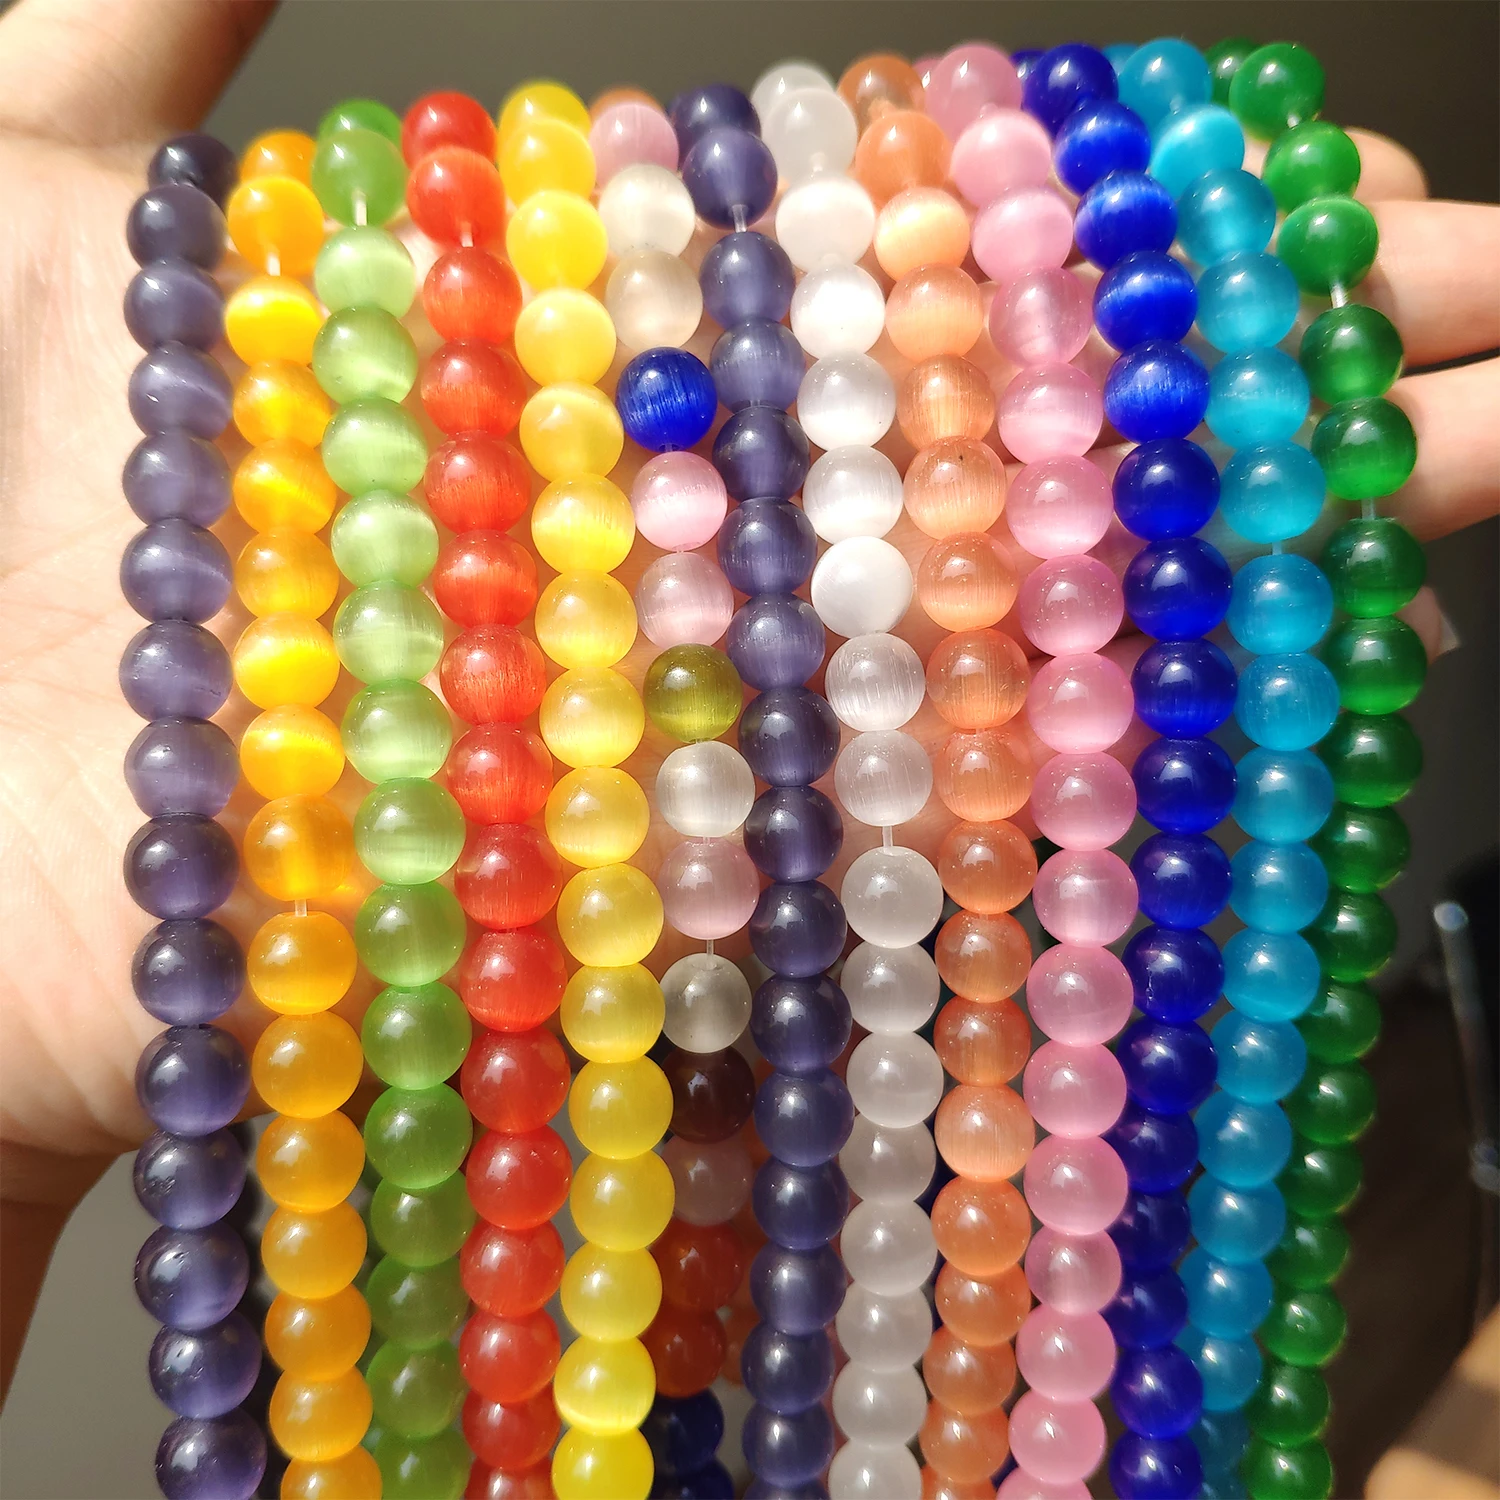 4 6 8 10 12mm Round Multiple Colour Cat Eye Loose Opal Natural Stone Beads For Jewelry Making Fit DIY Charm Bracelet Necklace